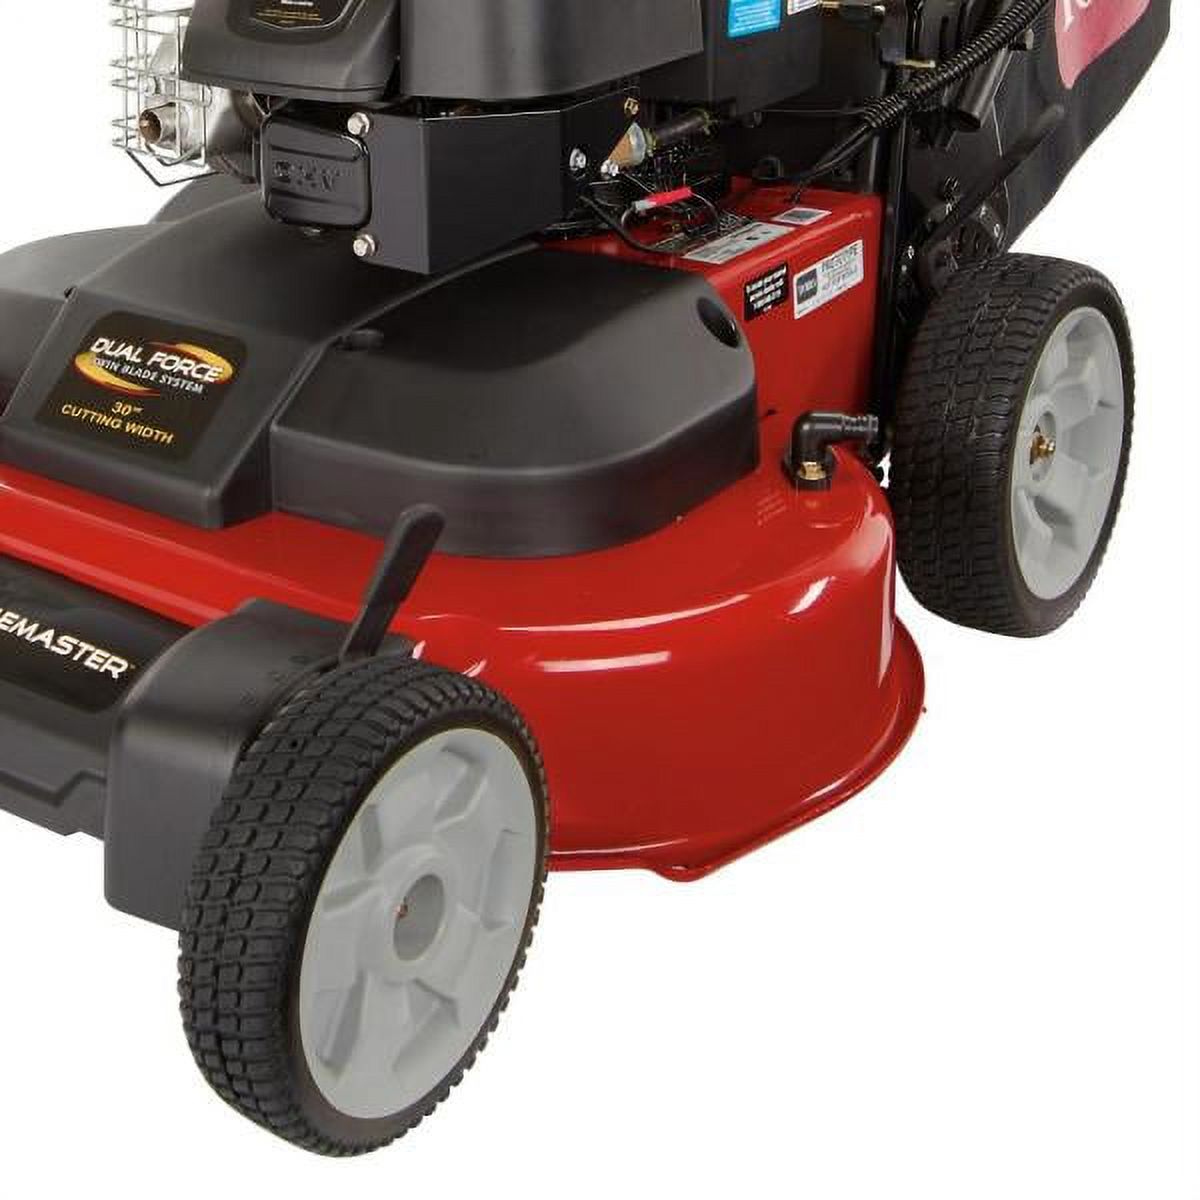 Toro 21199 TimeMaster 30 in. Briggs & Stratton Personal Pace Self-Propelled - image 4 of 8